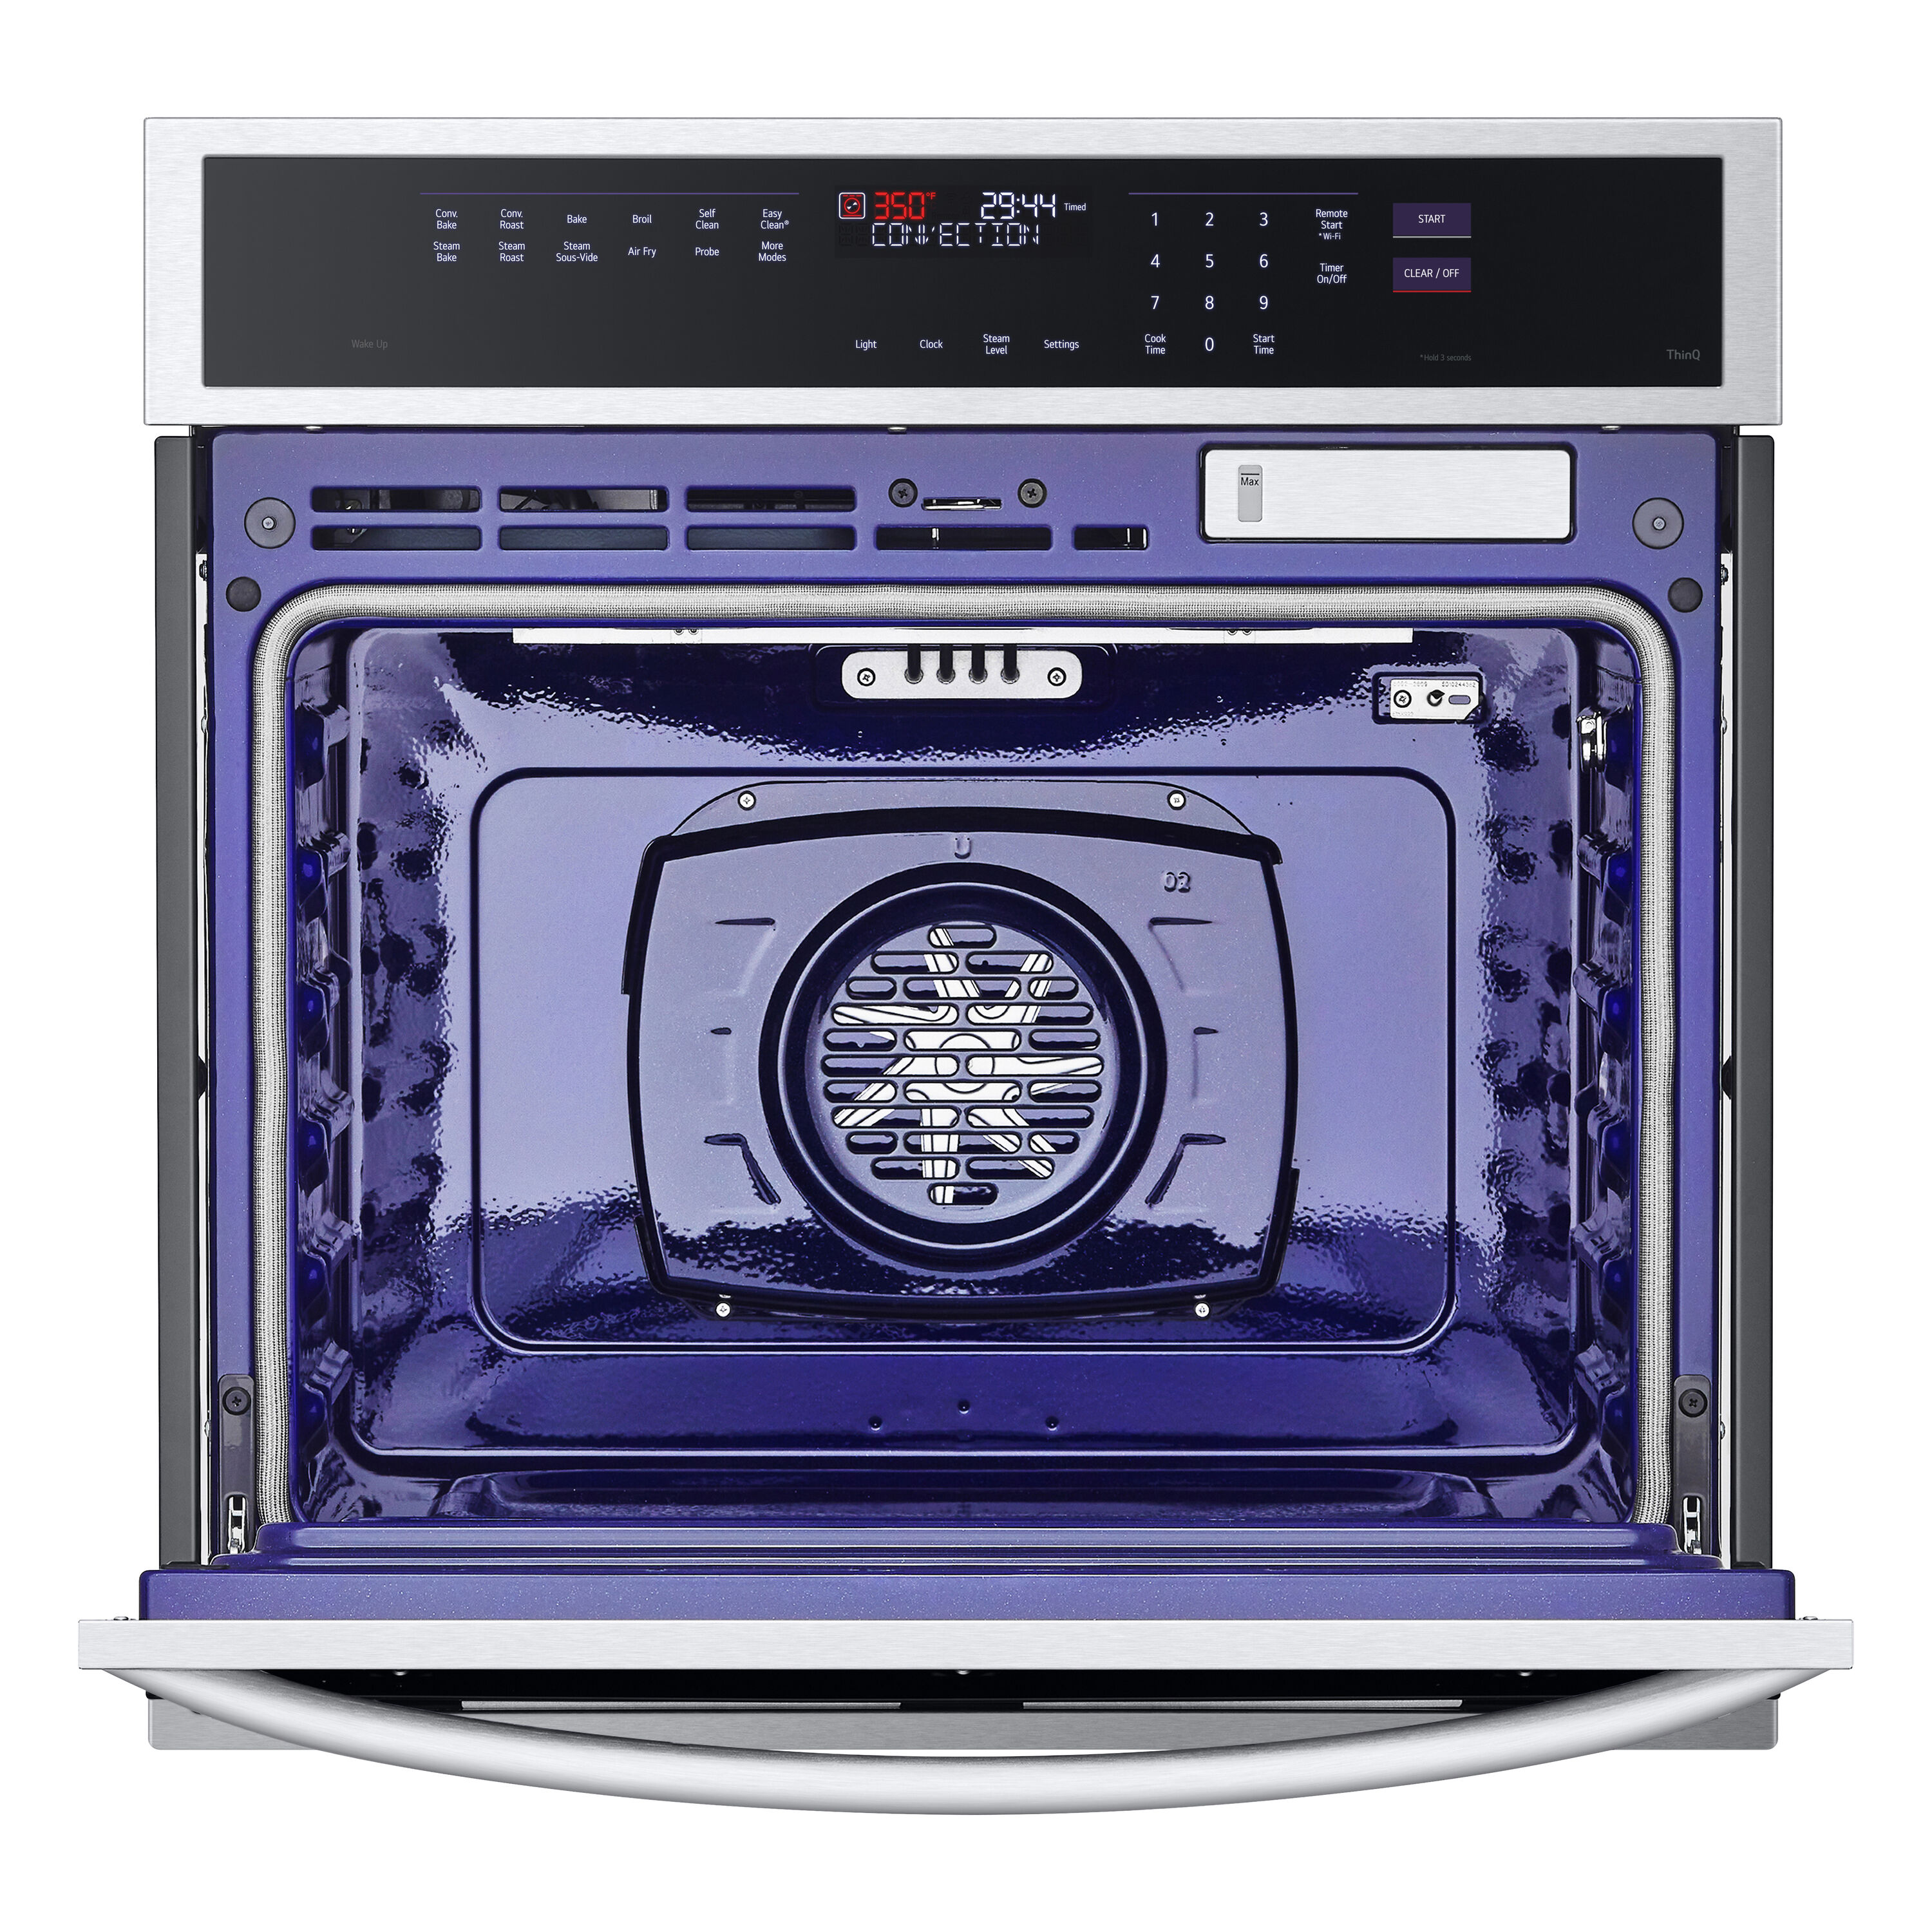 LG Single Wall Ovens: Compare LG Built-in Single Ovens